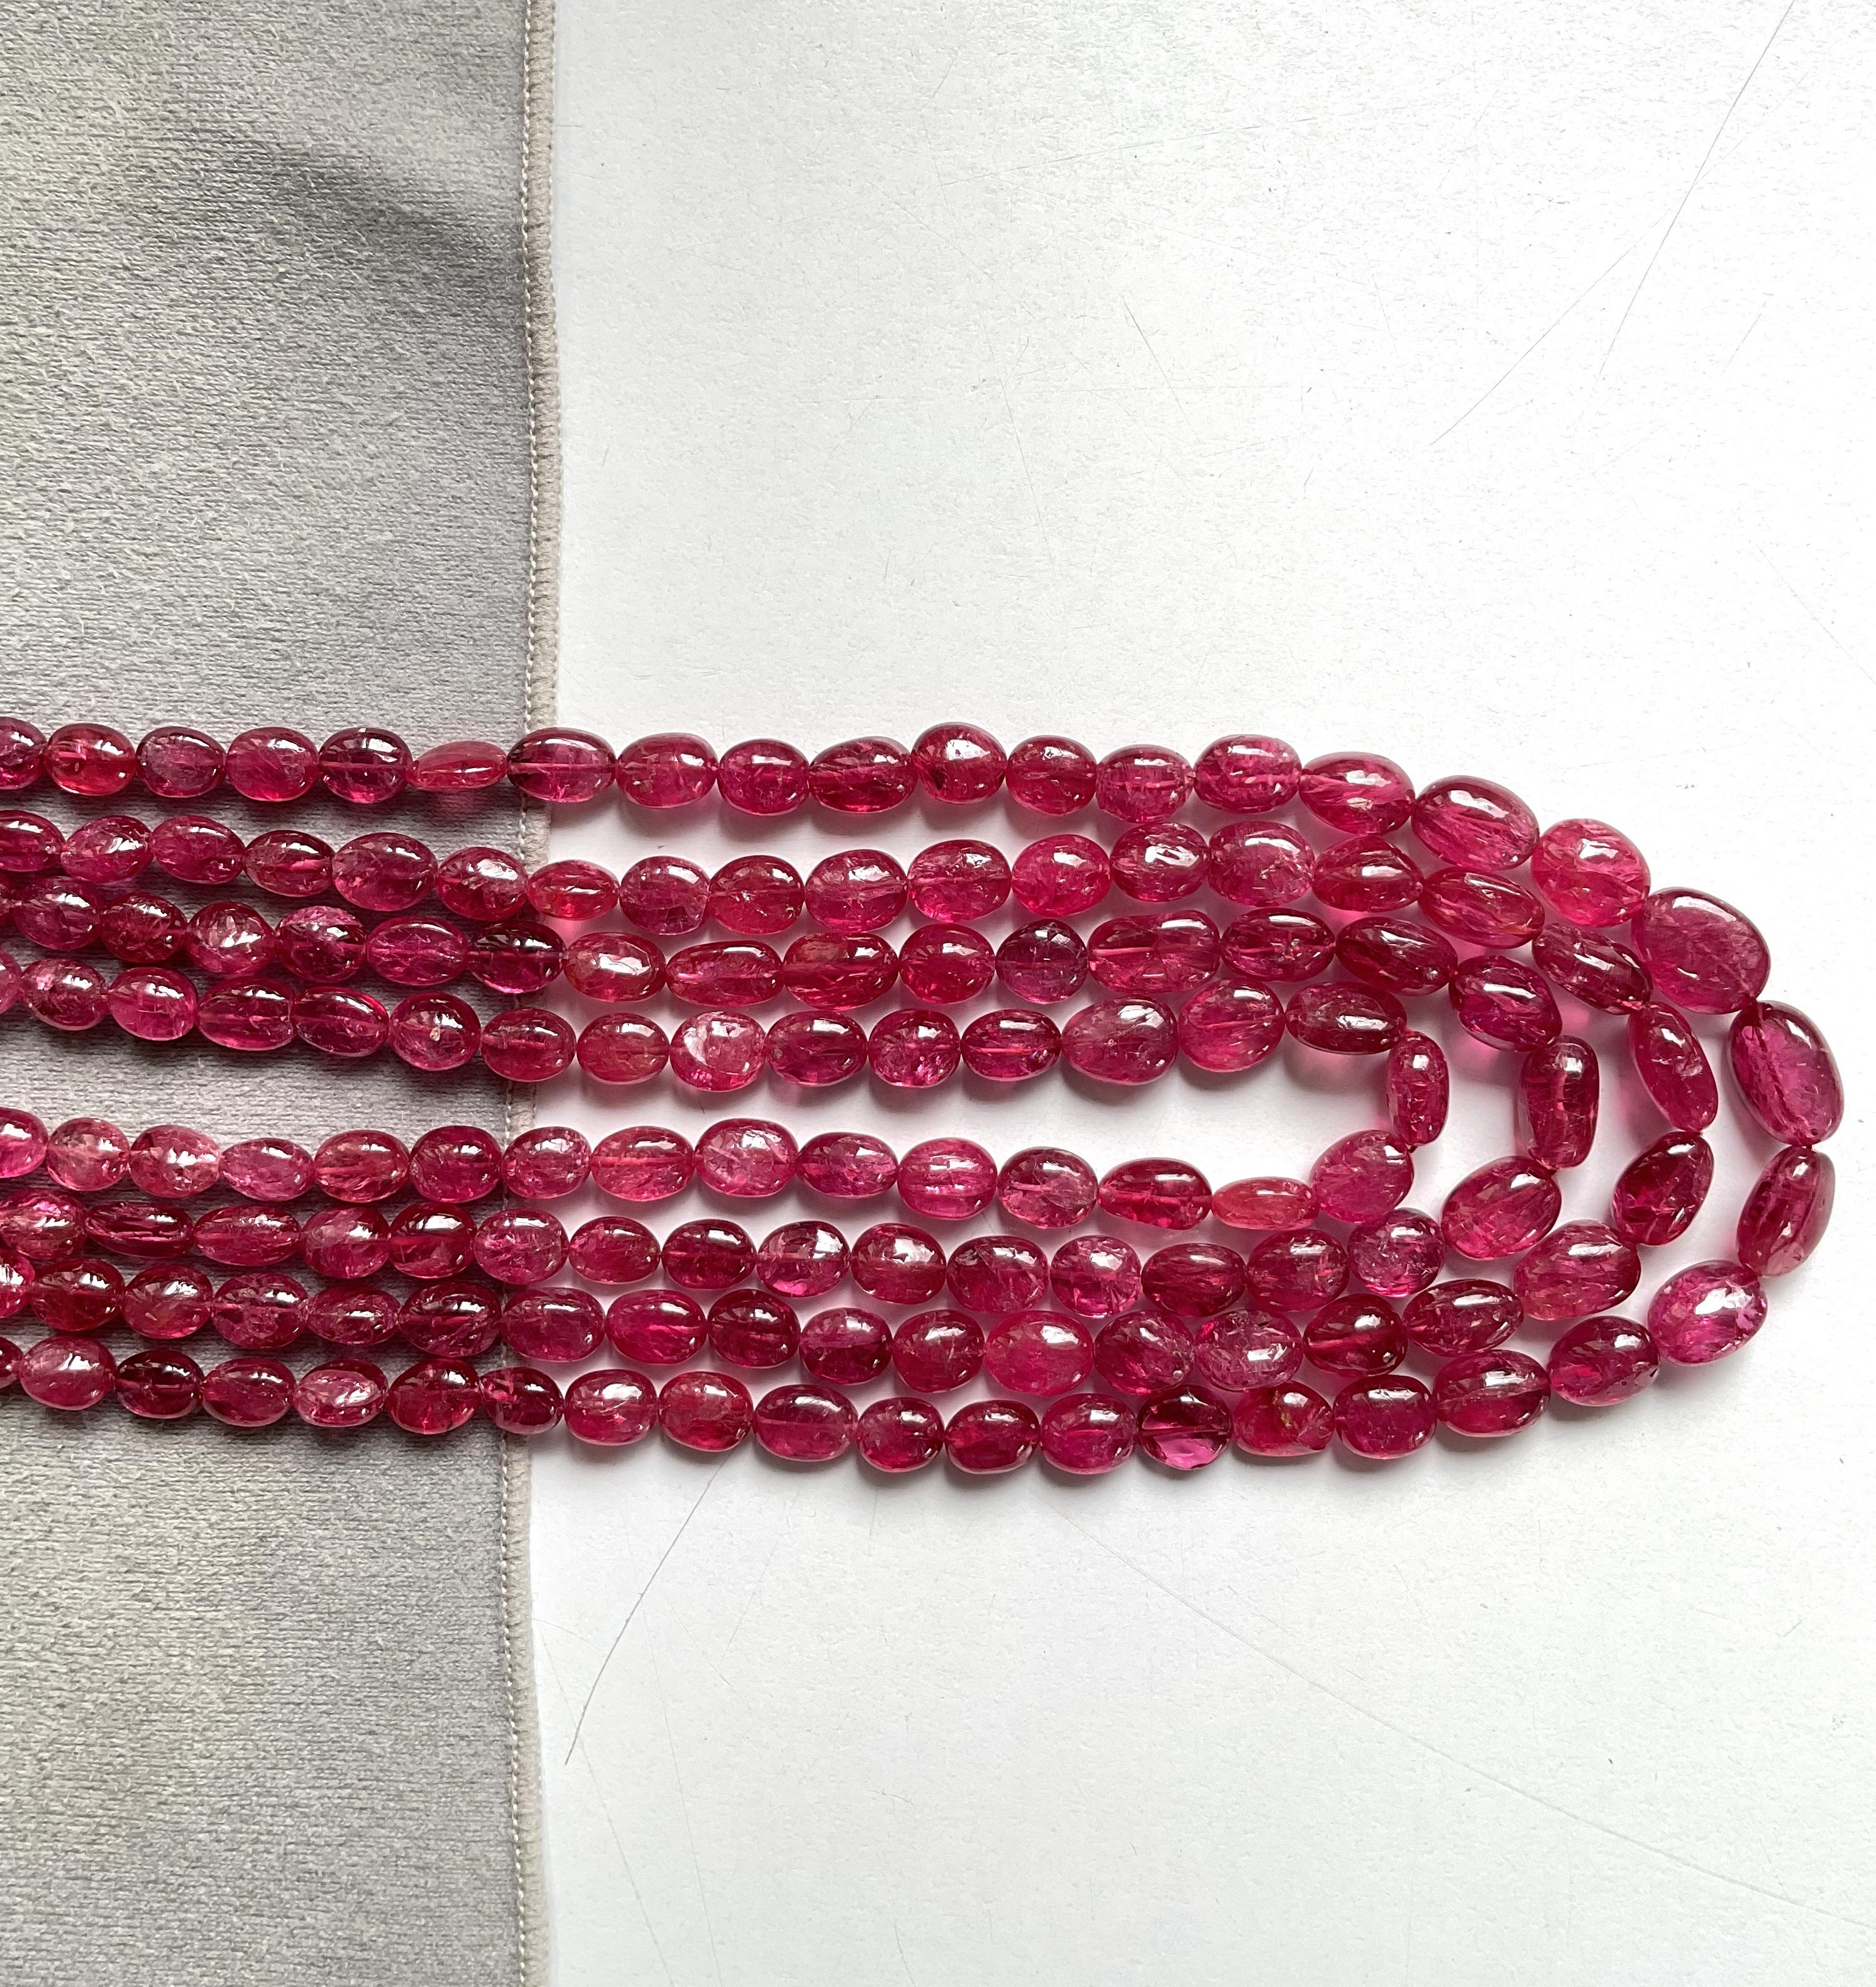 548.75 Carats Burma Red Spinel Top Quality Tumble Plain Natural Gemstone For Sale 3